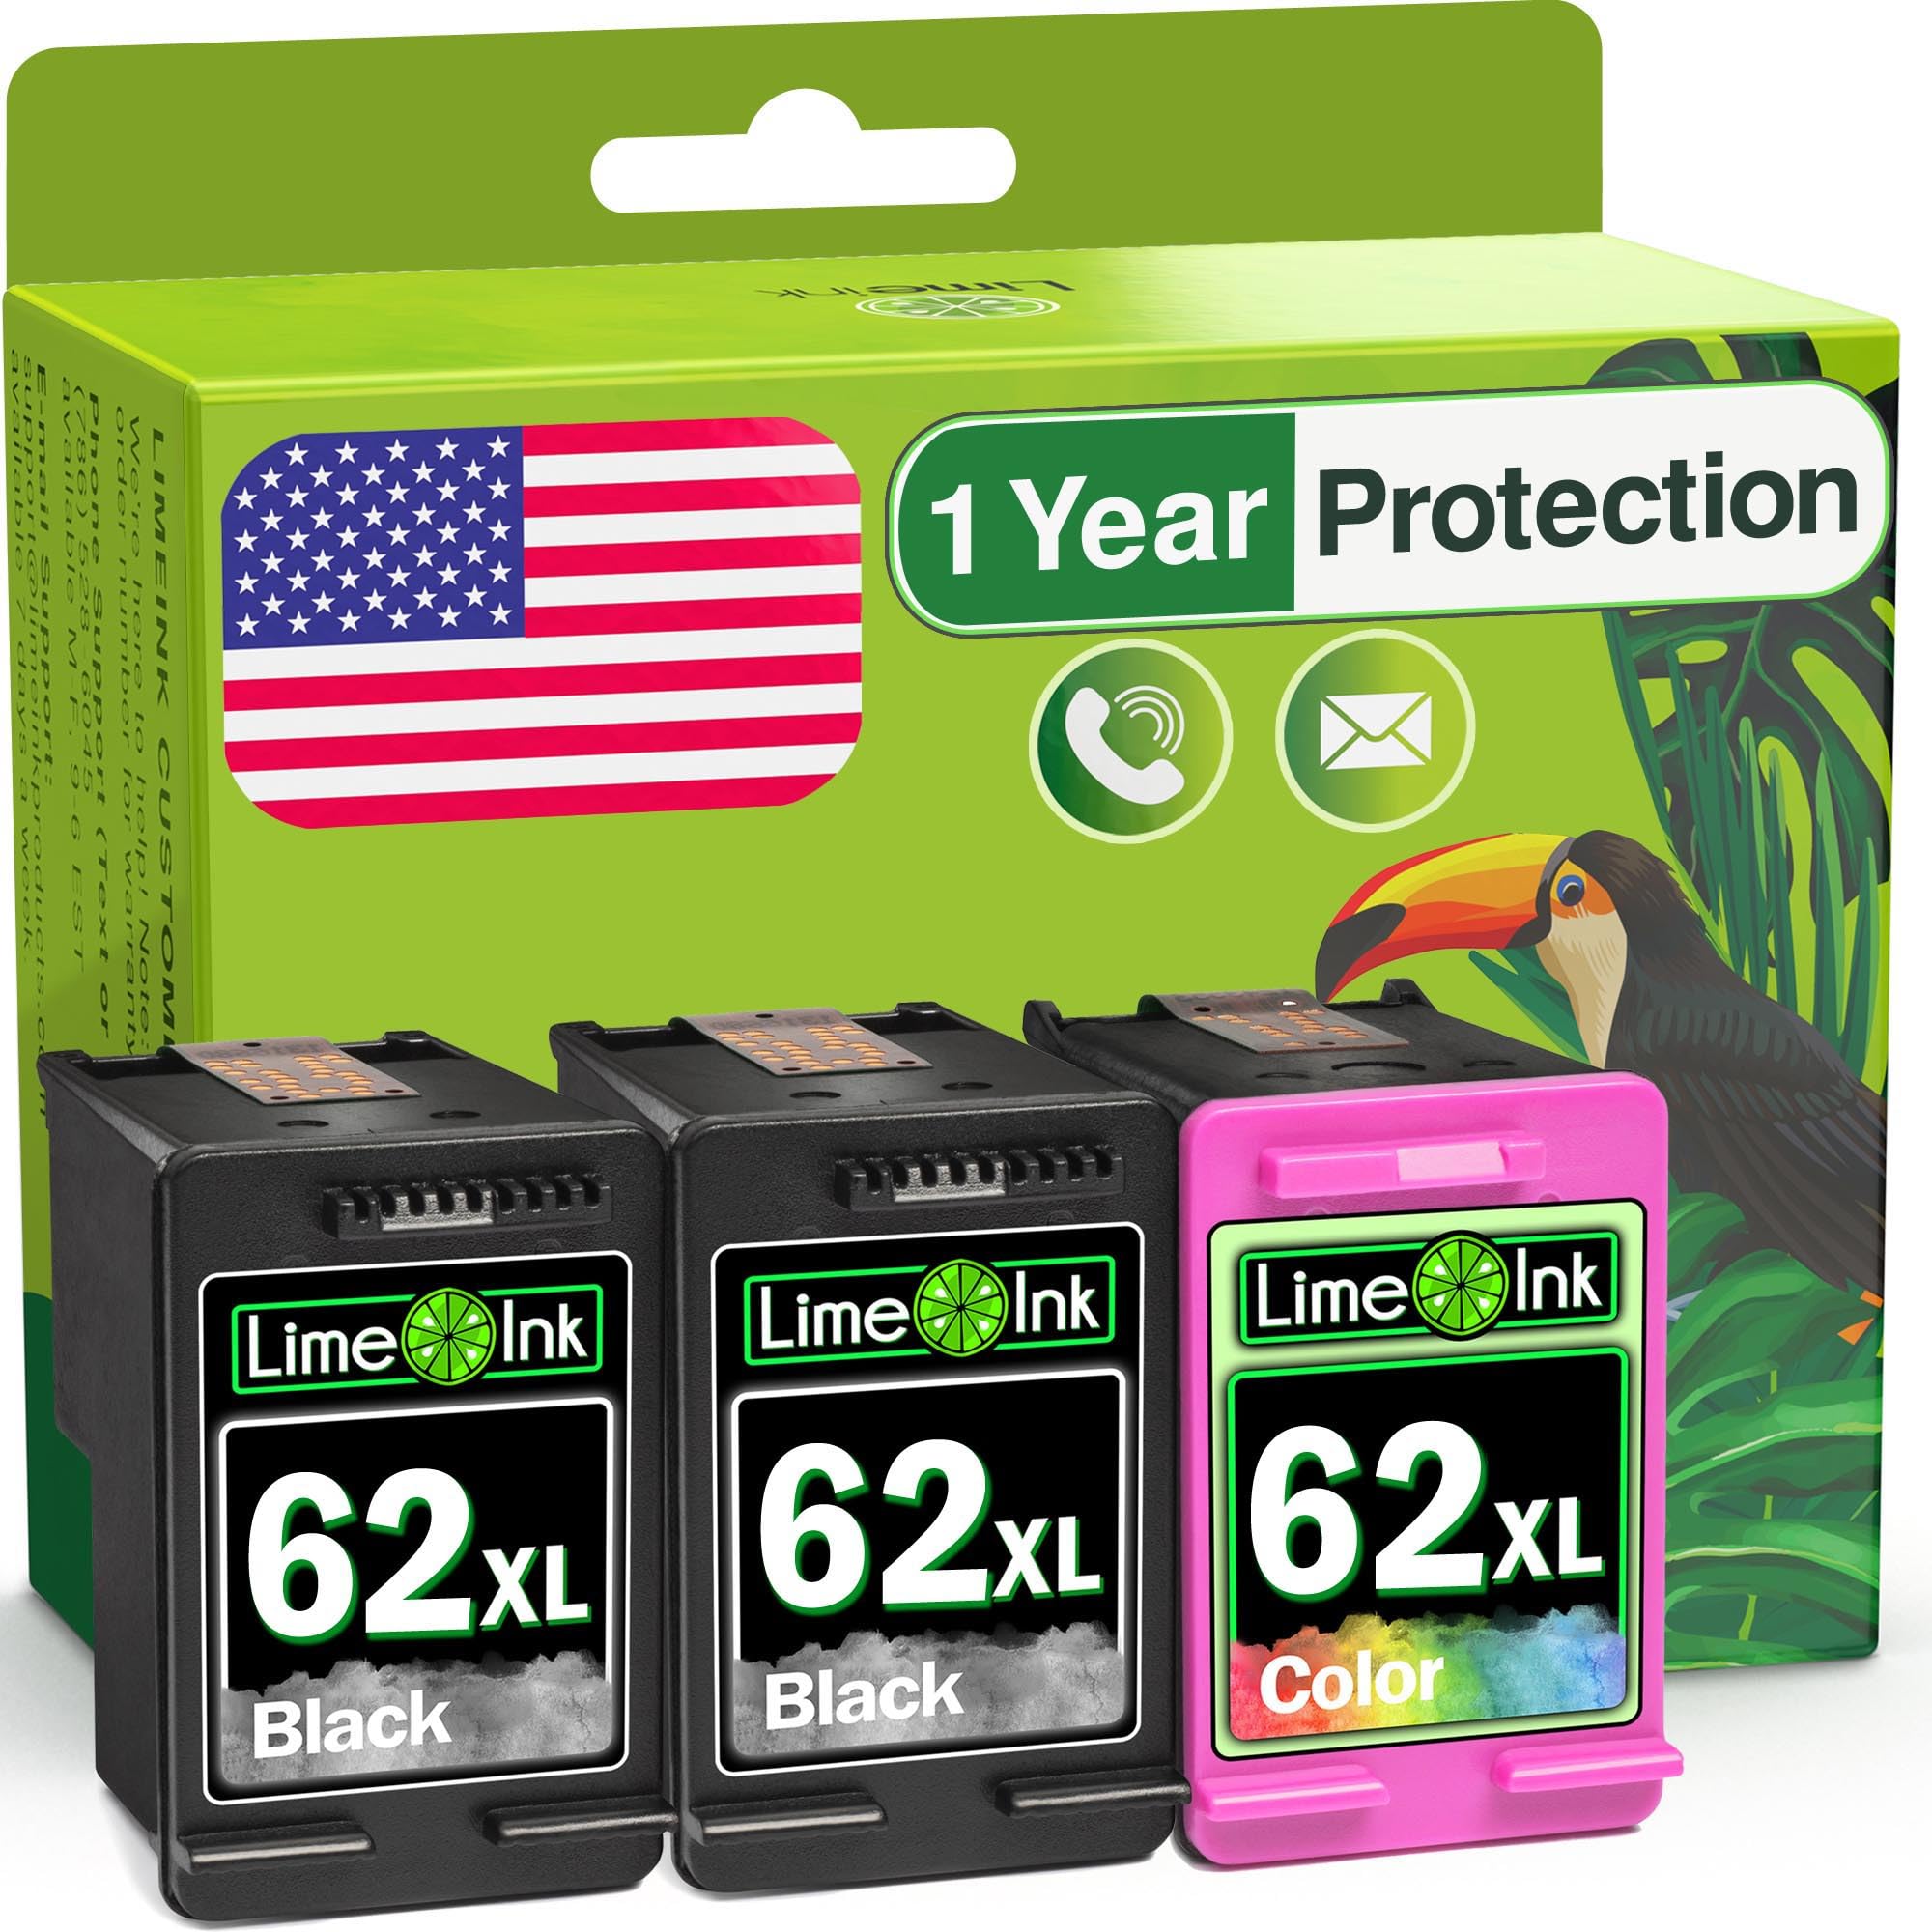 Limeink 3 Remanufactured Ink Cartridge Replacement for HP 62xl Ink Cartridges Black and Color for HP Ink 62 XL for hp 62xl ink cartridge combo pack for HP Ink 62xl Black and Color Combo - 2BK, 1 Color